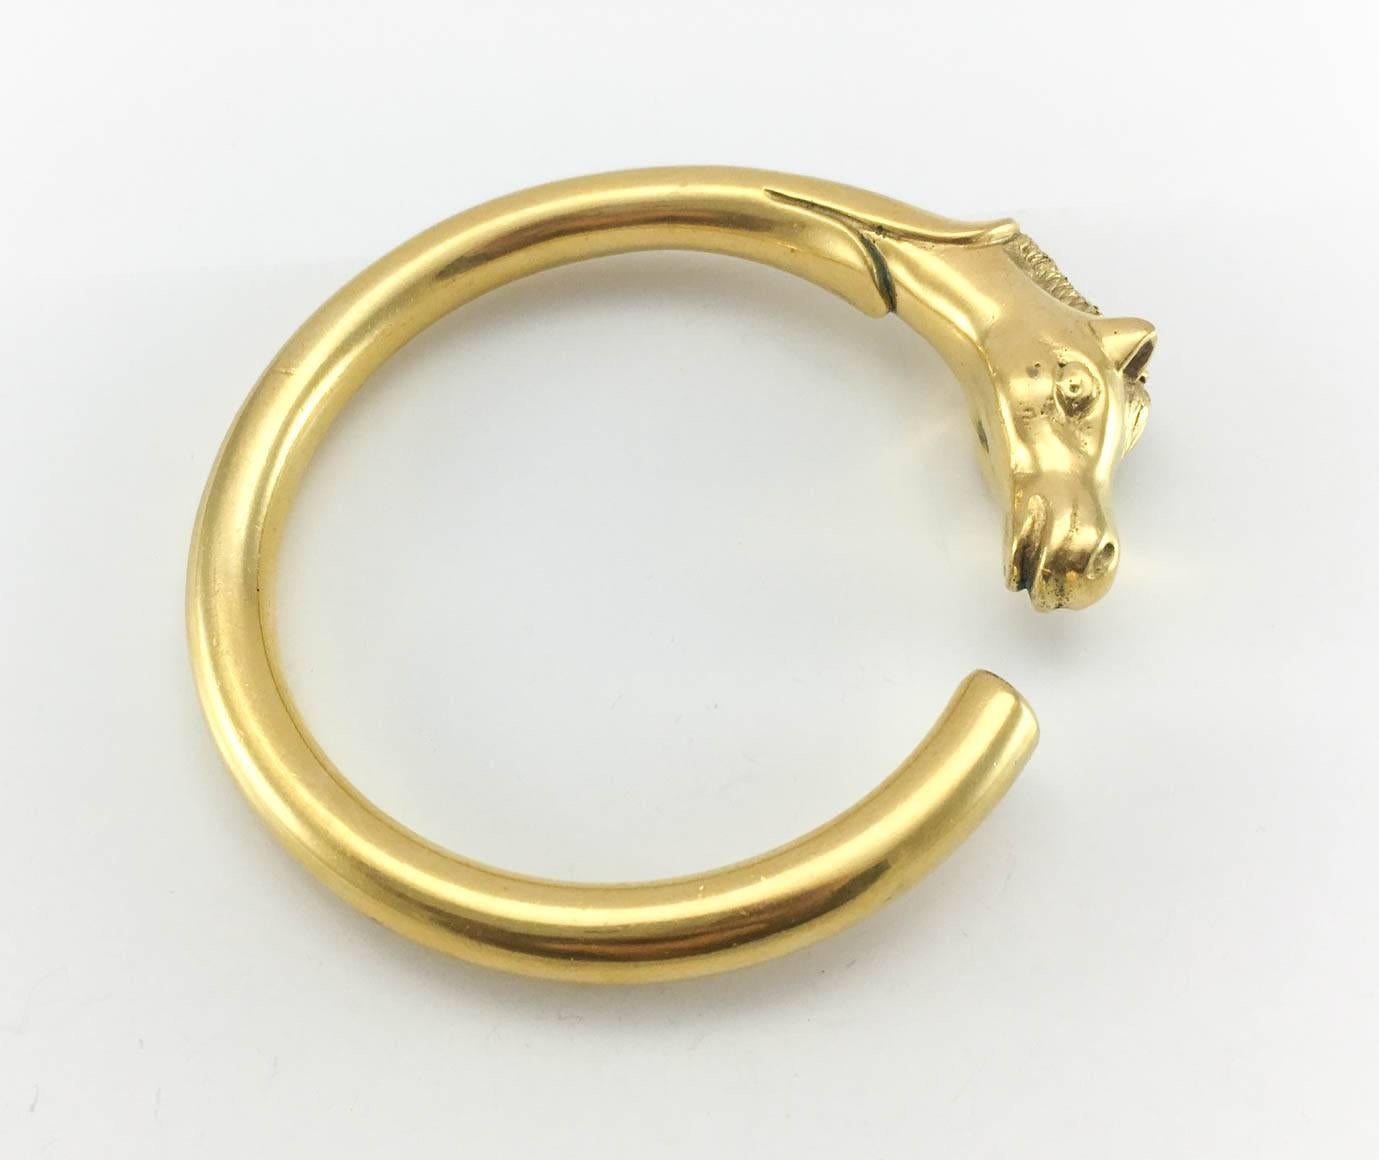 Vintage Hermes Horse Head Bangle. This gorgeous bracelet by Hermes is gold plated and dates back from the 1980s. The design features a beautifully crafted horse head on one end of a minimalist, clean-lined bangle. This piece pays homage to the